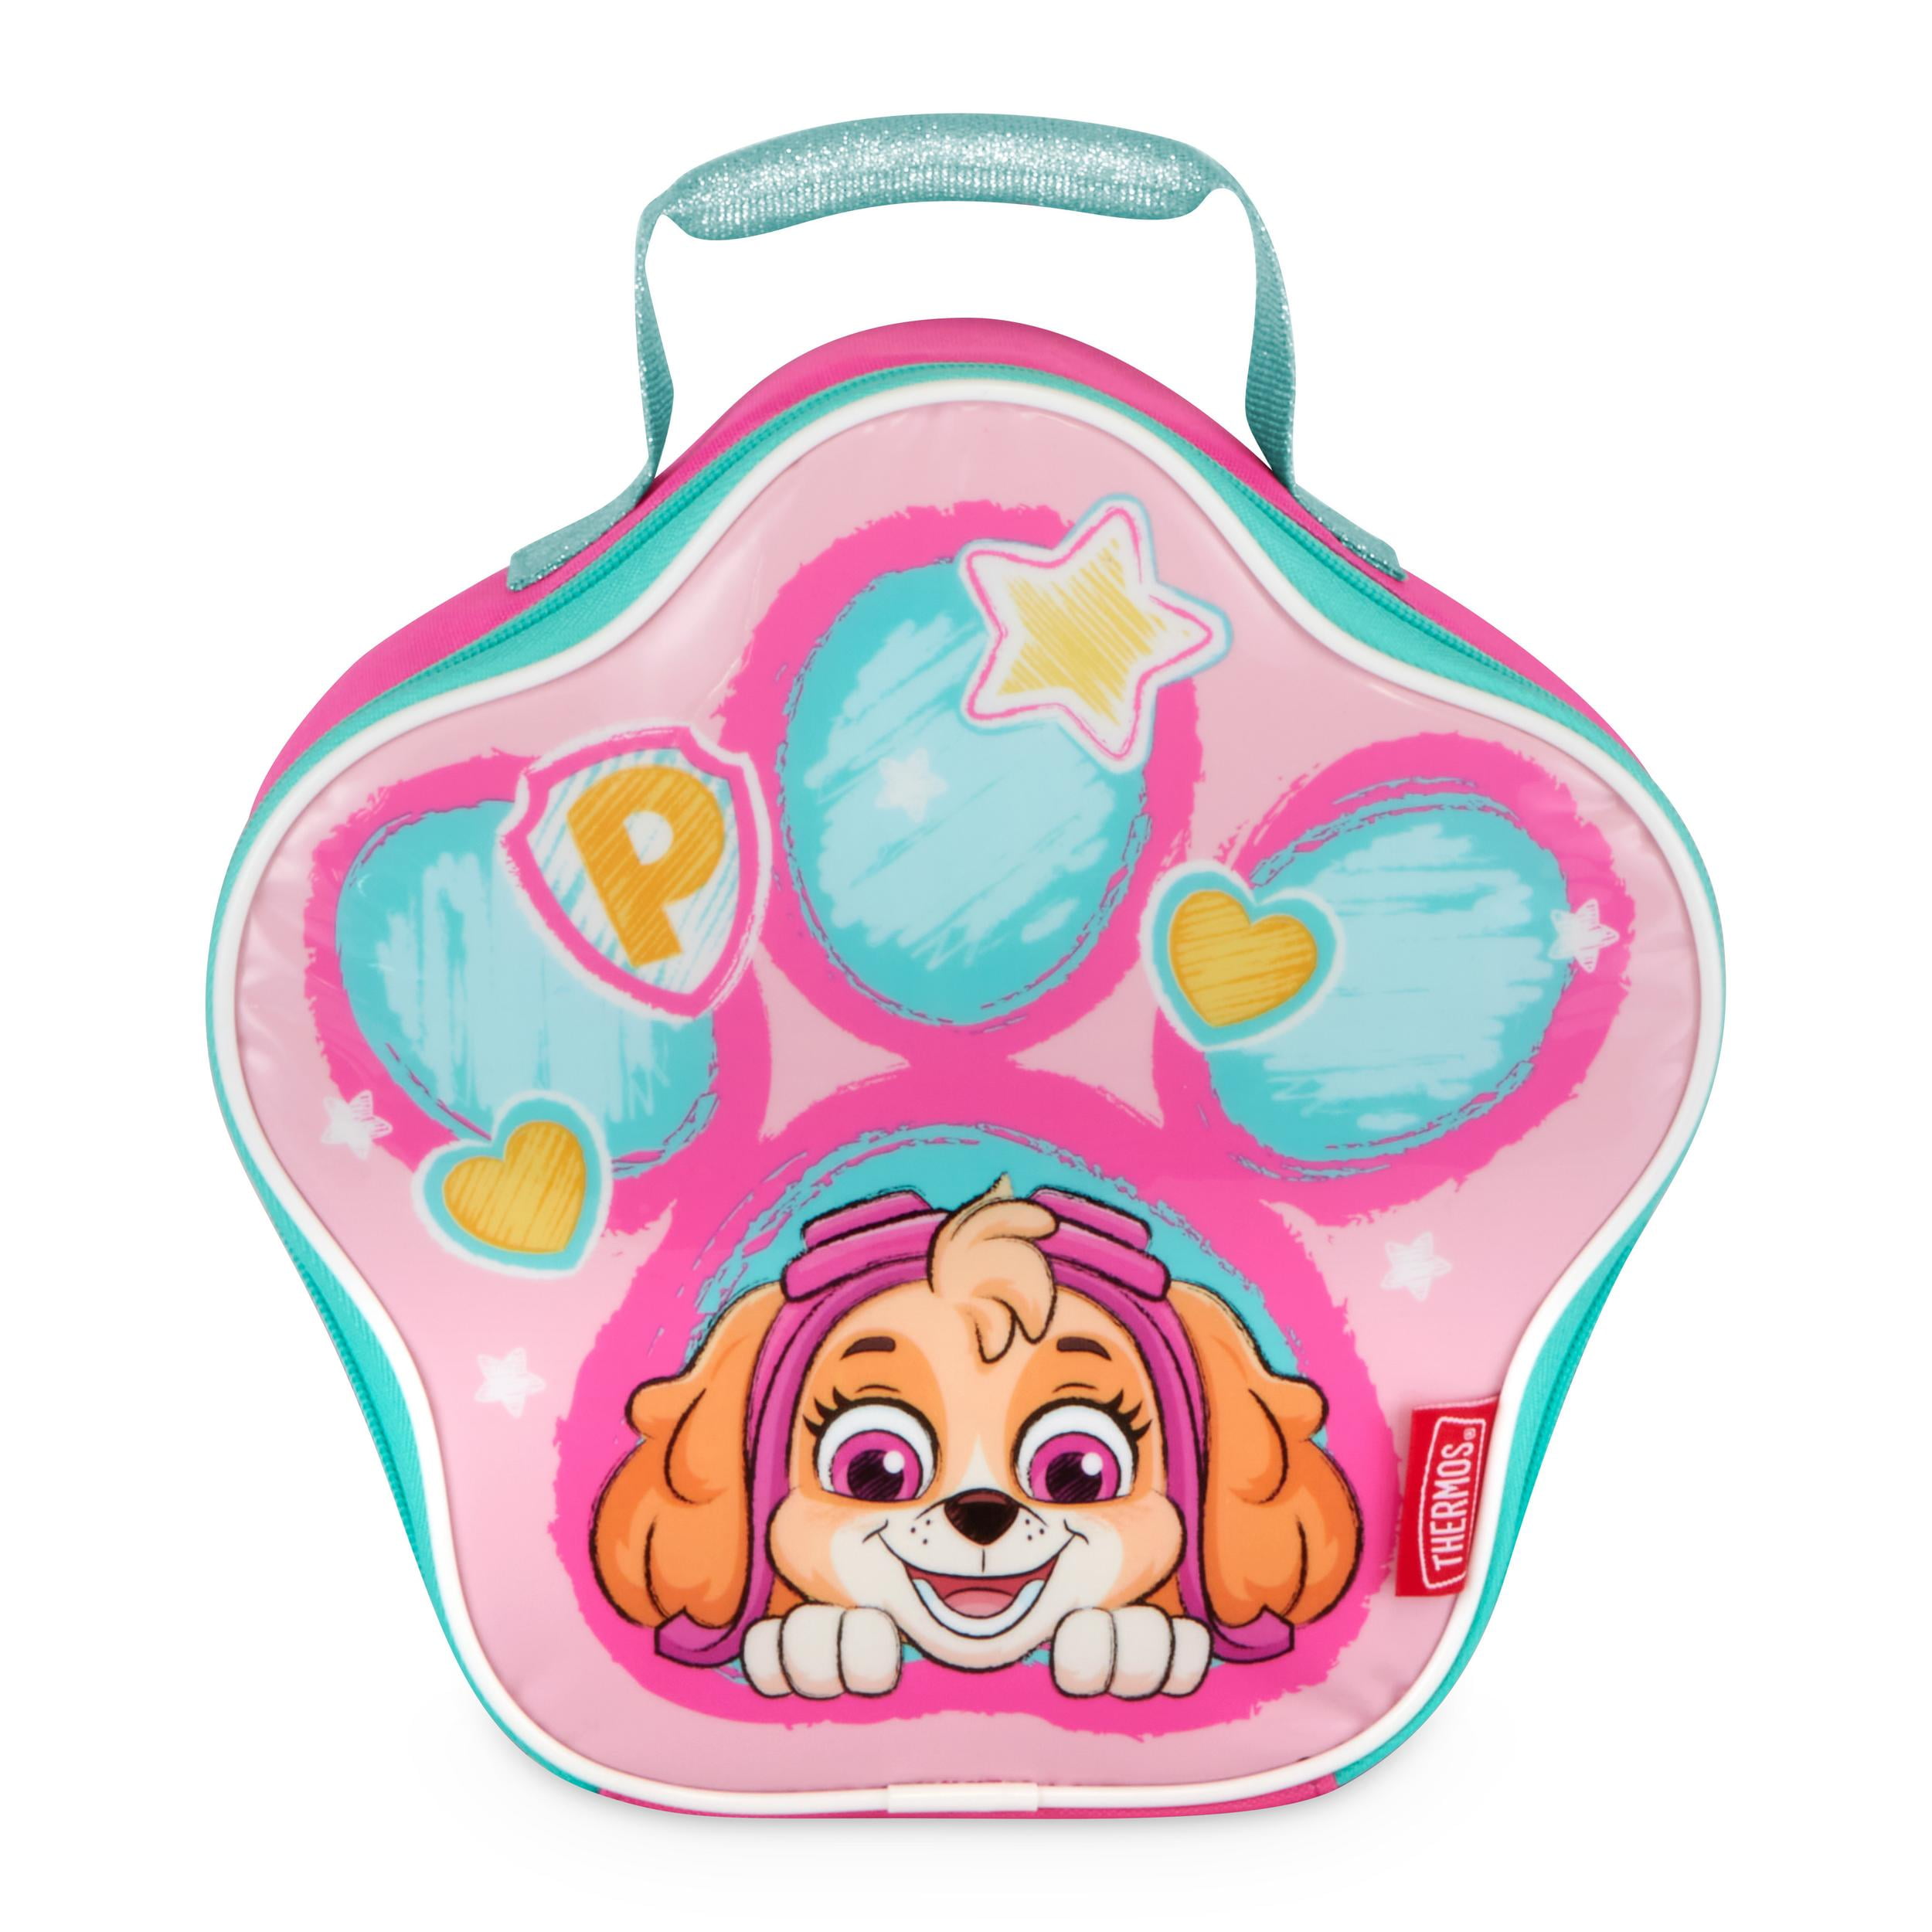 Thermos Paw Patrol Standard Lunch Kit, Lunch Bags